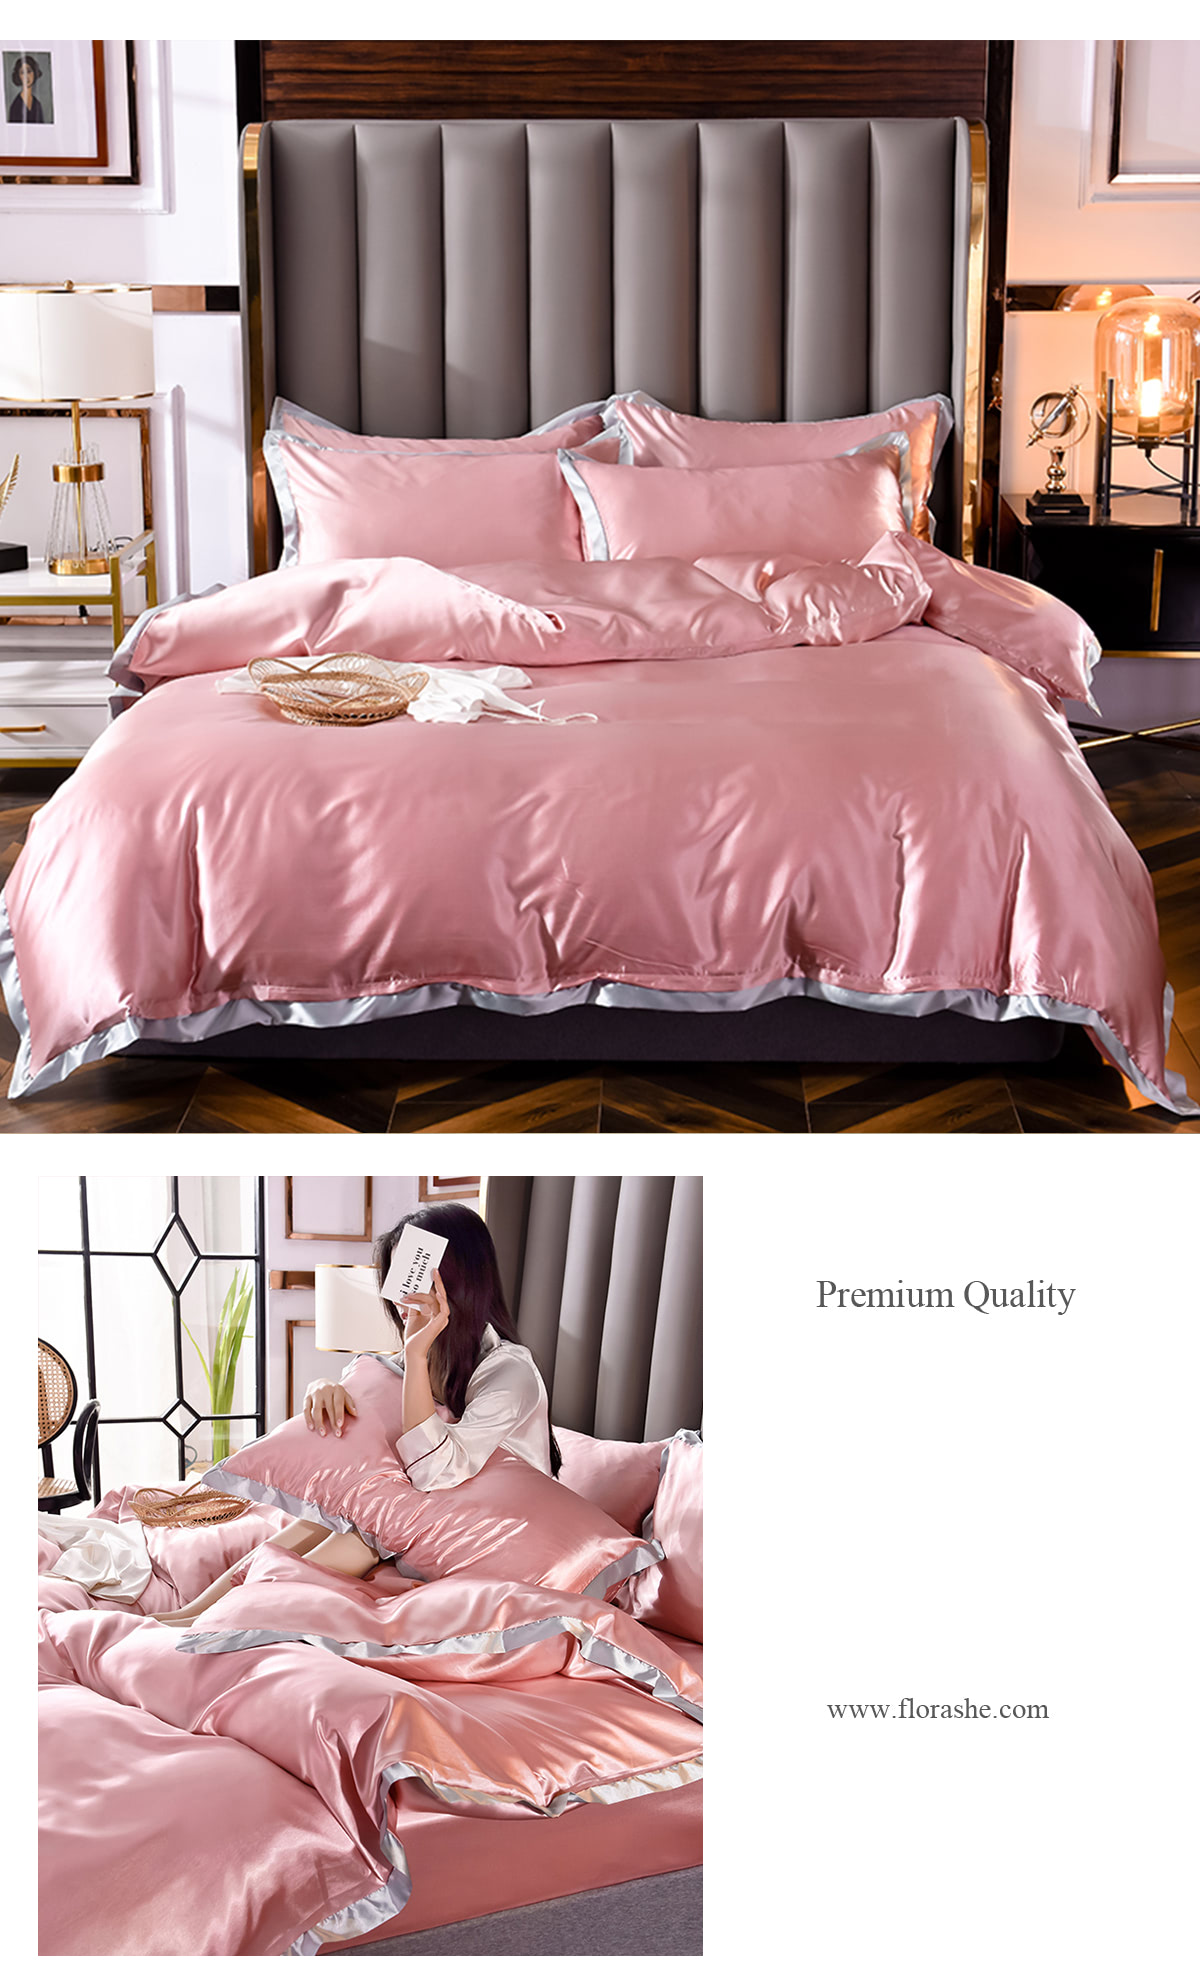 Fresh-and-Soft-Comfortable-Satin-Bed-Cover-Sheet-Set27.jpg